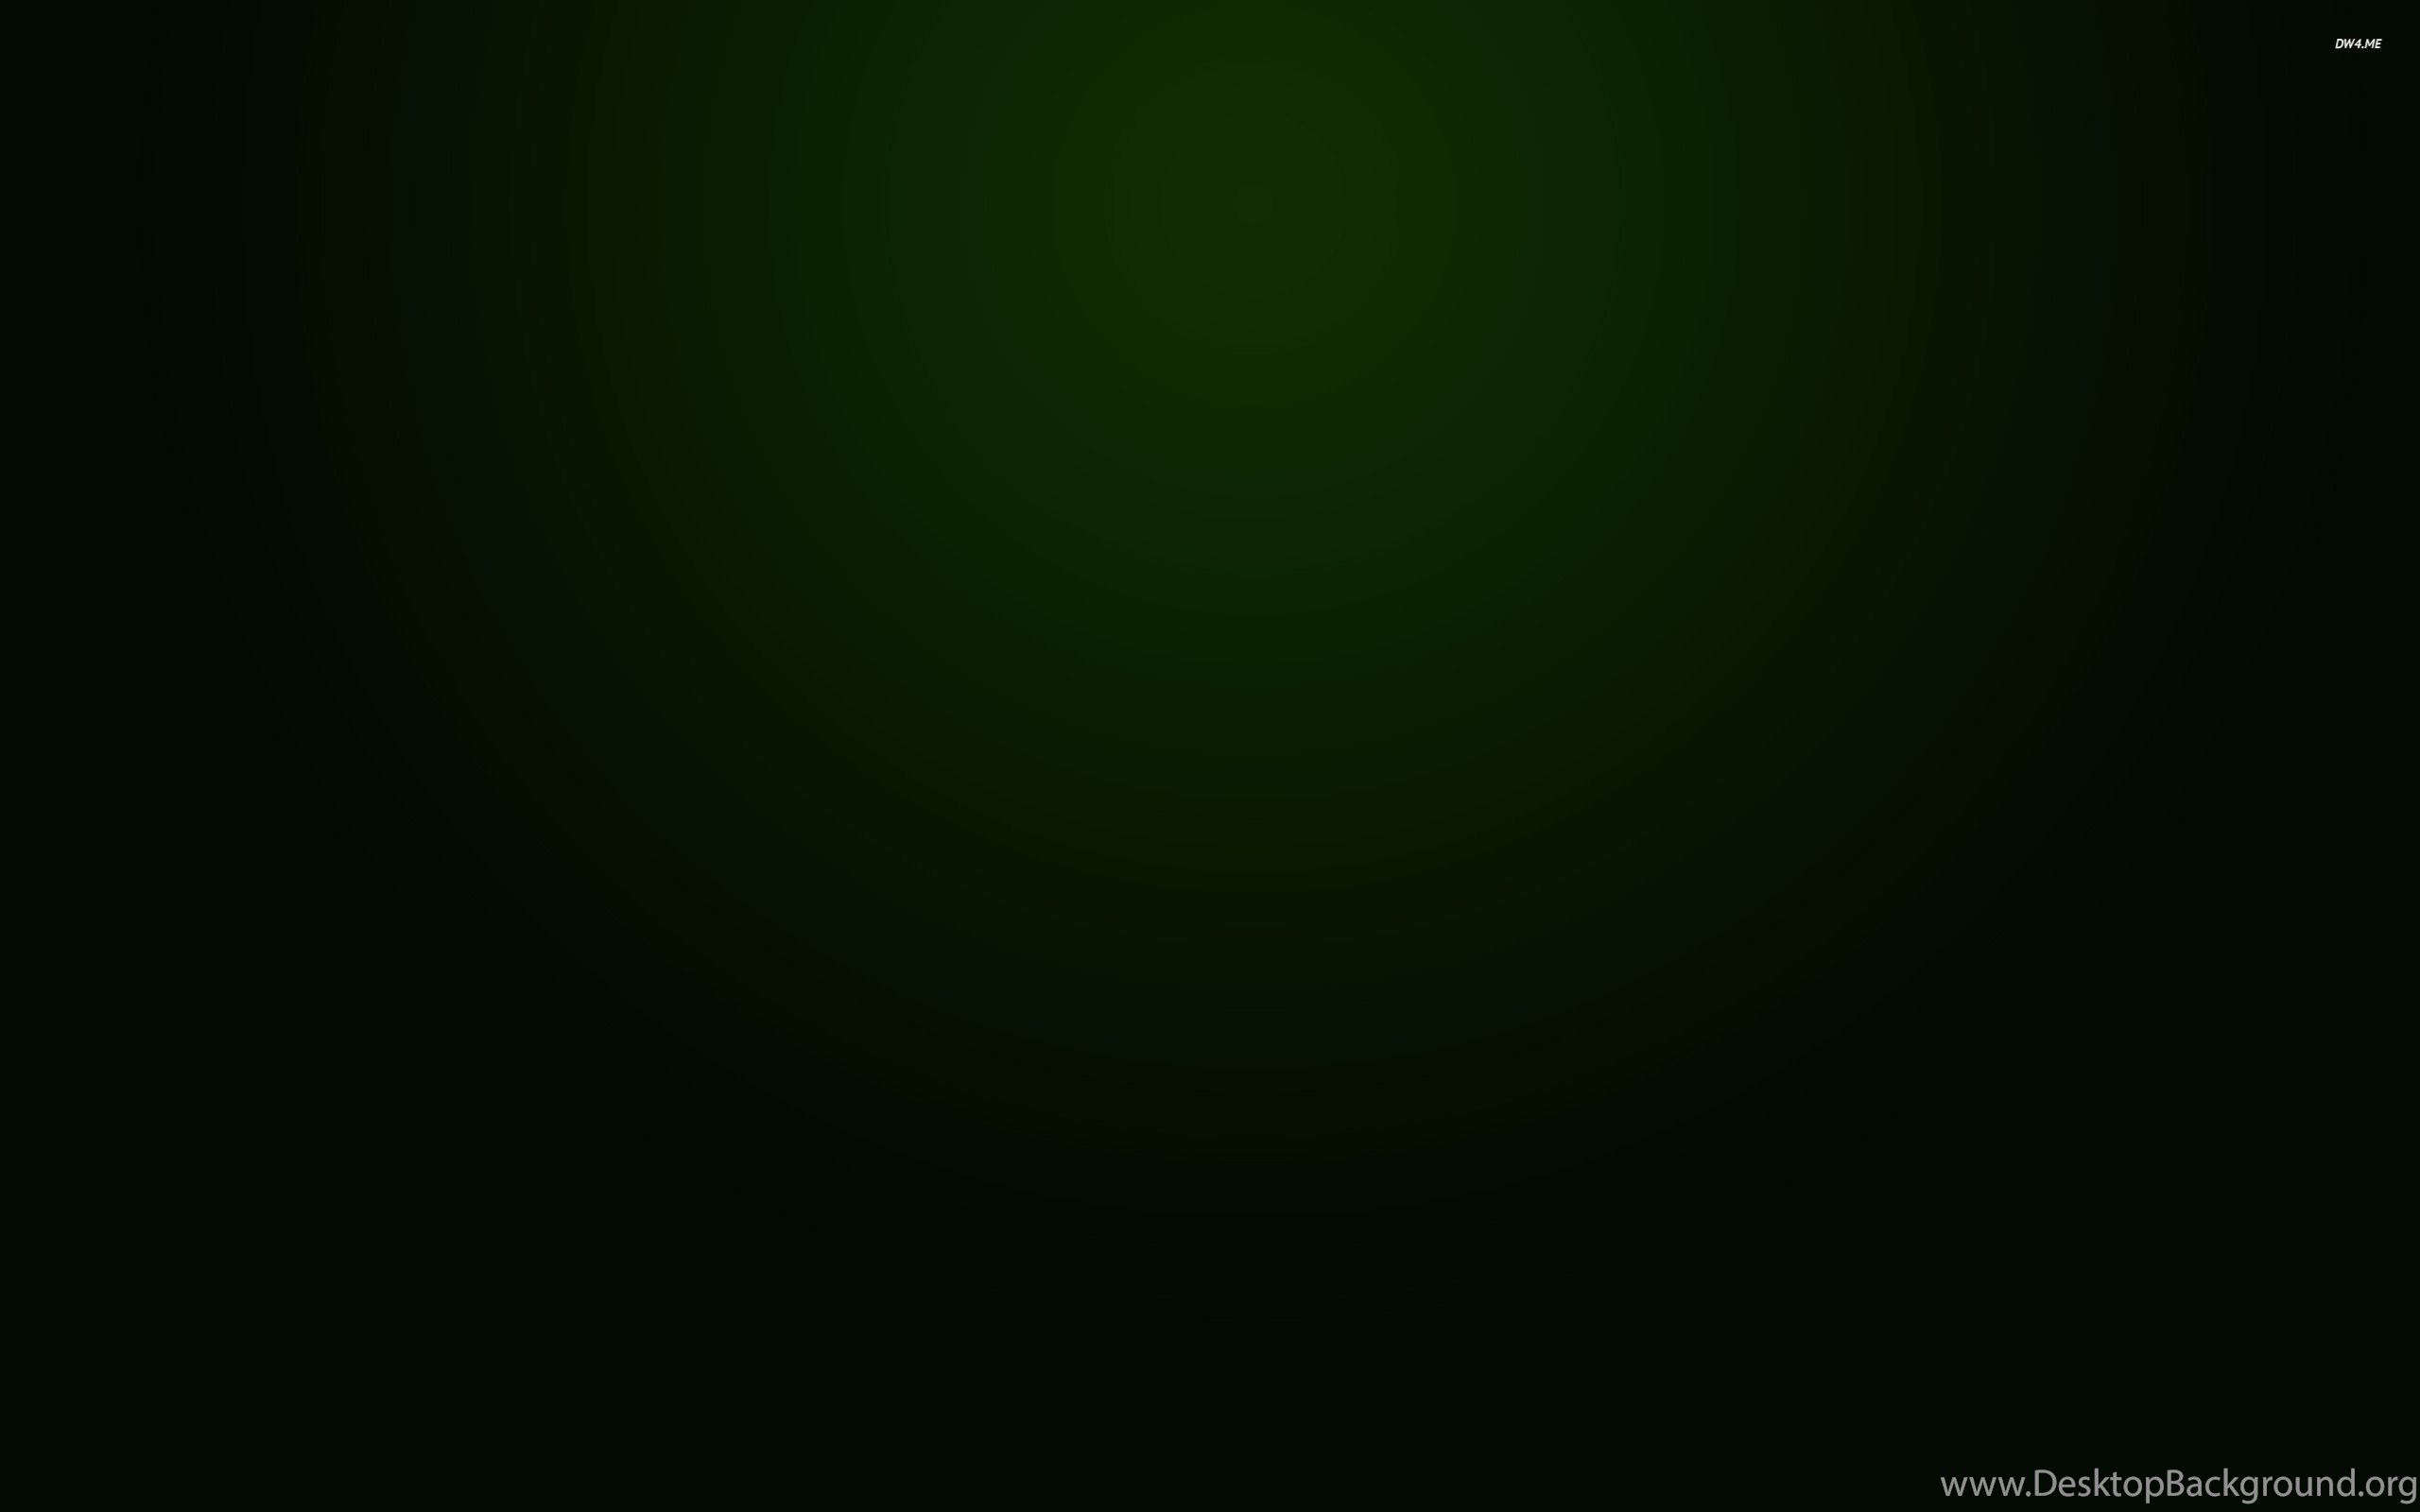 Black and Green Gradient Wallpaper Free Black and Green Gradient Background